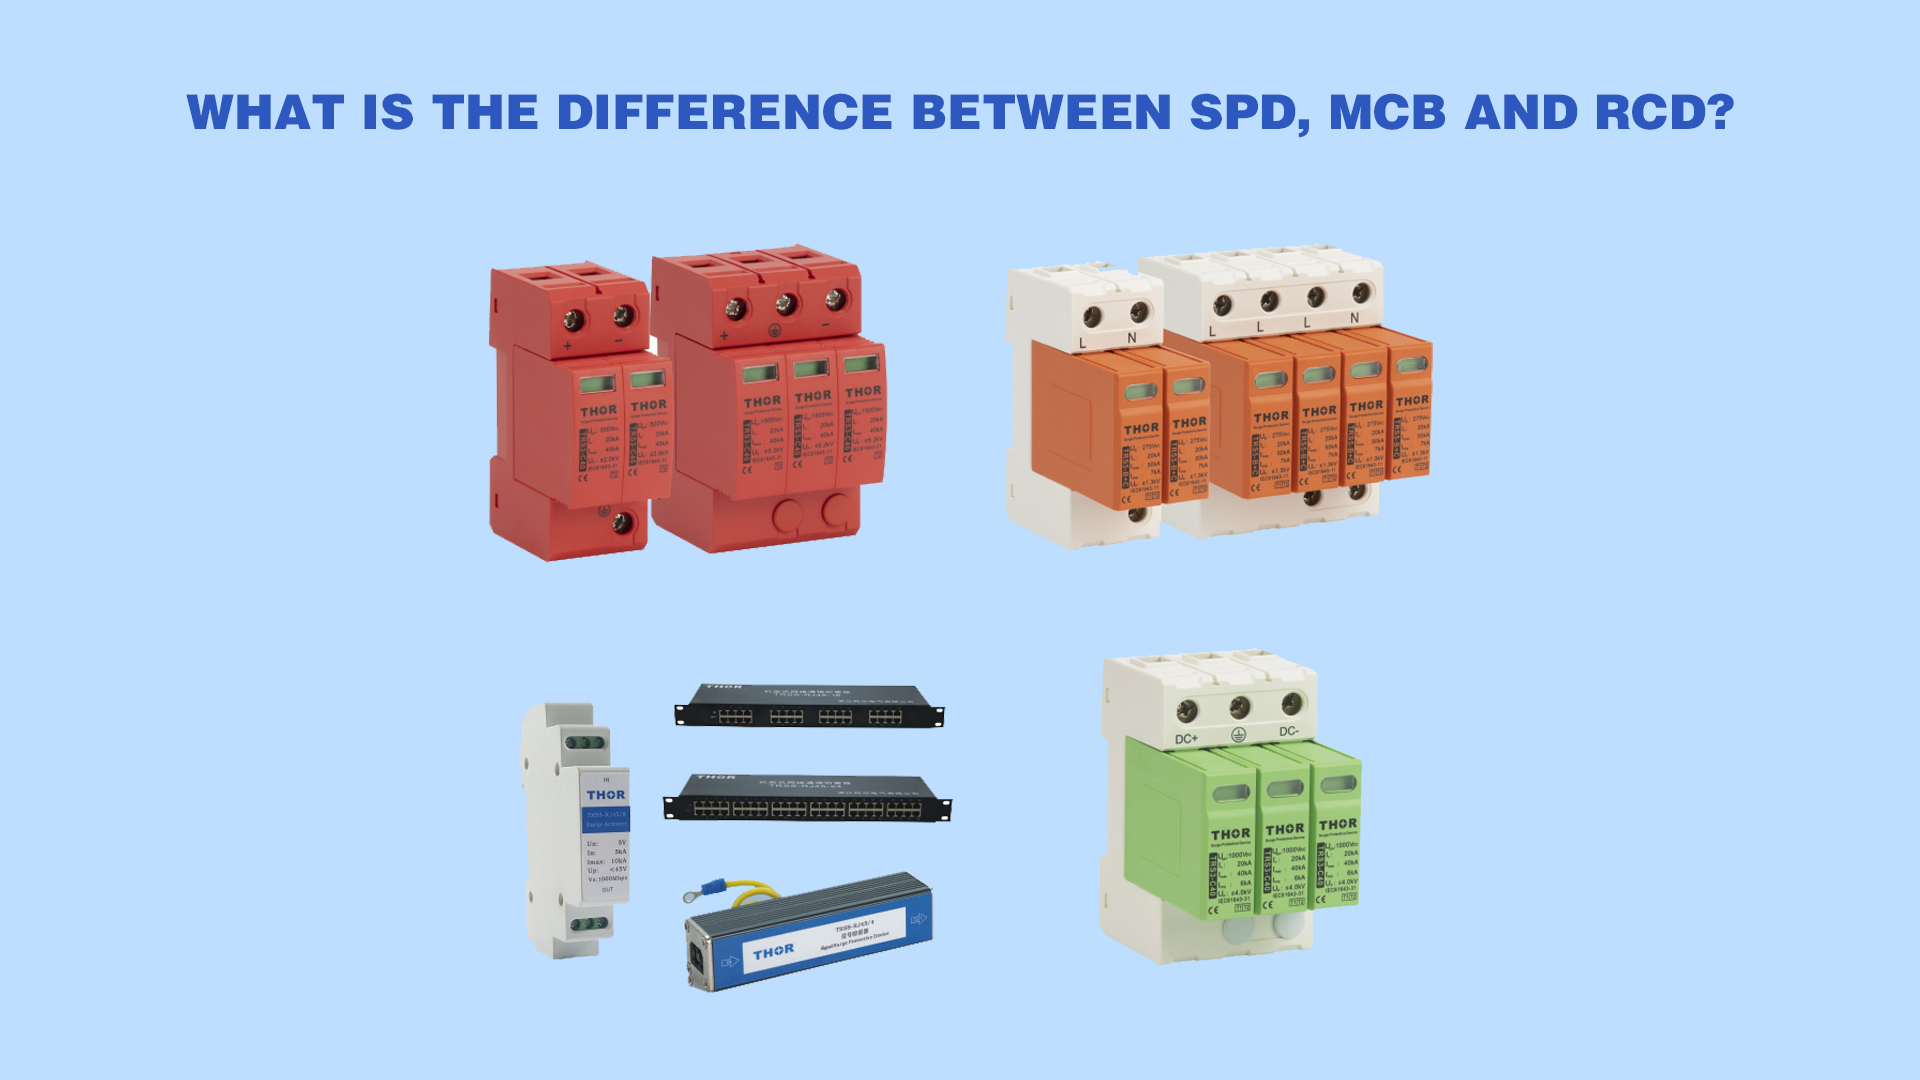 What is the difference between SPD, MCB and RCD?